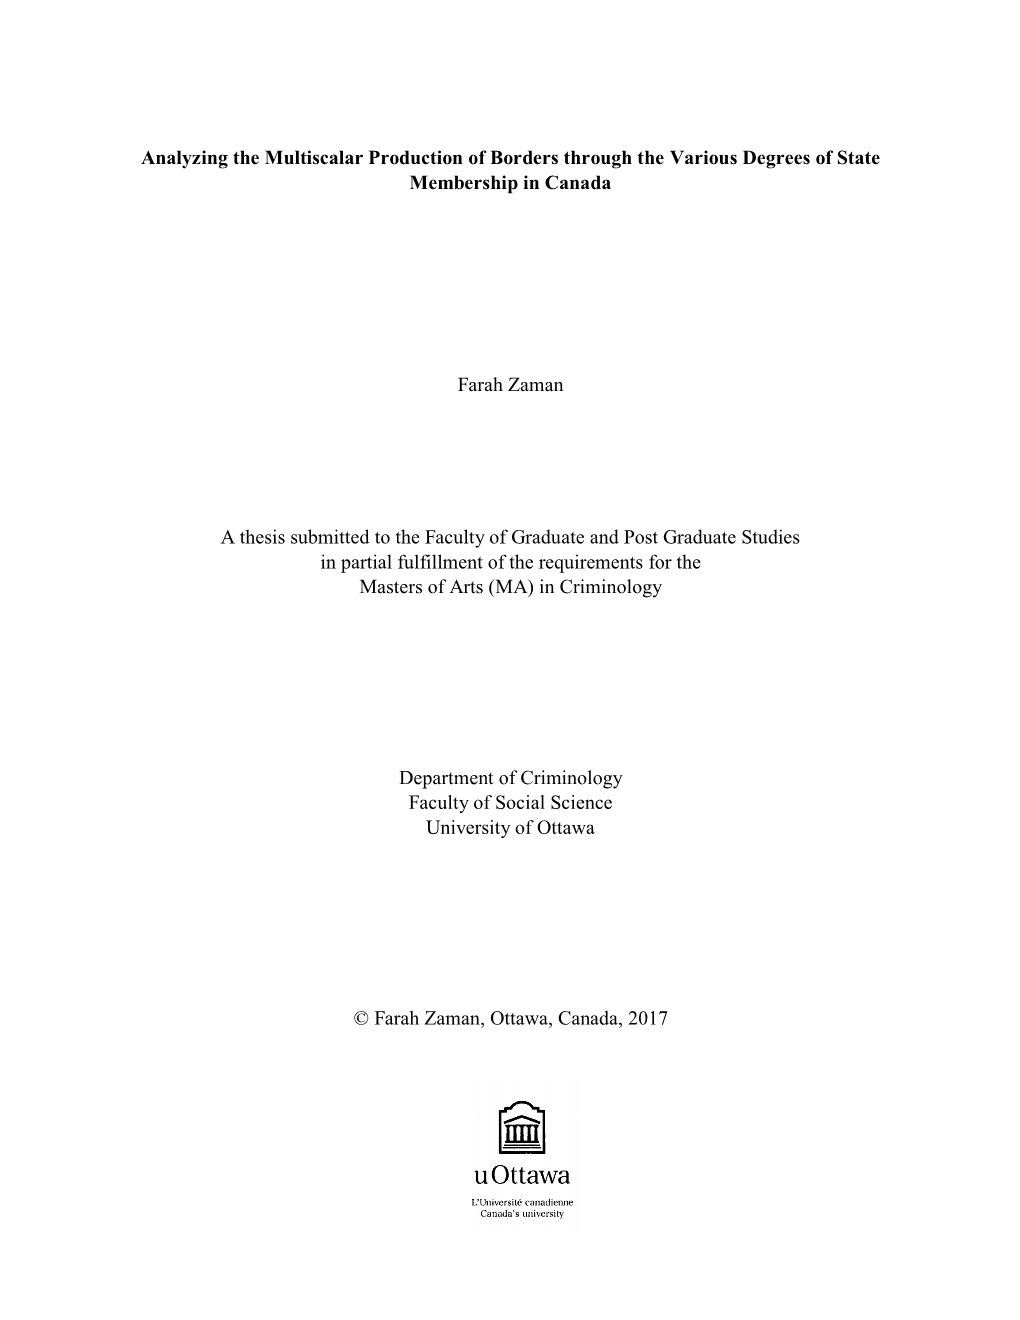 Analyzing the Multiscalar Production of Borders Through the Various Degrees of State Membership in Canada Farah Zaman a Thesis S